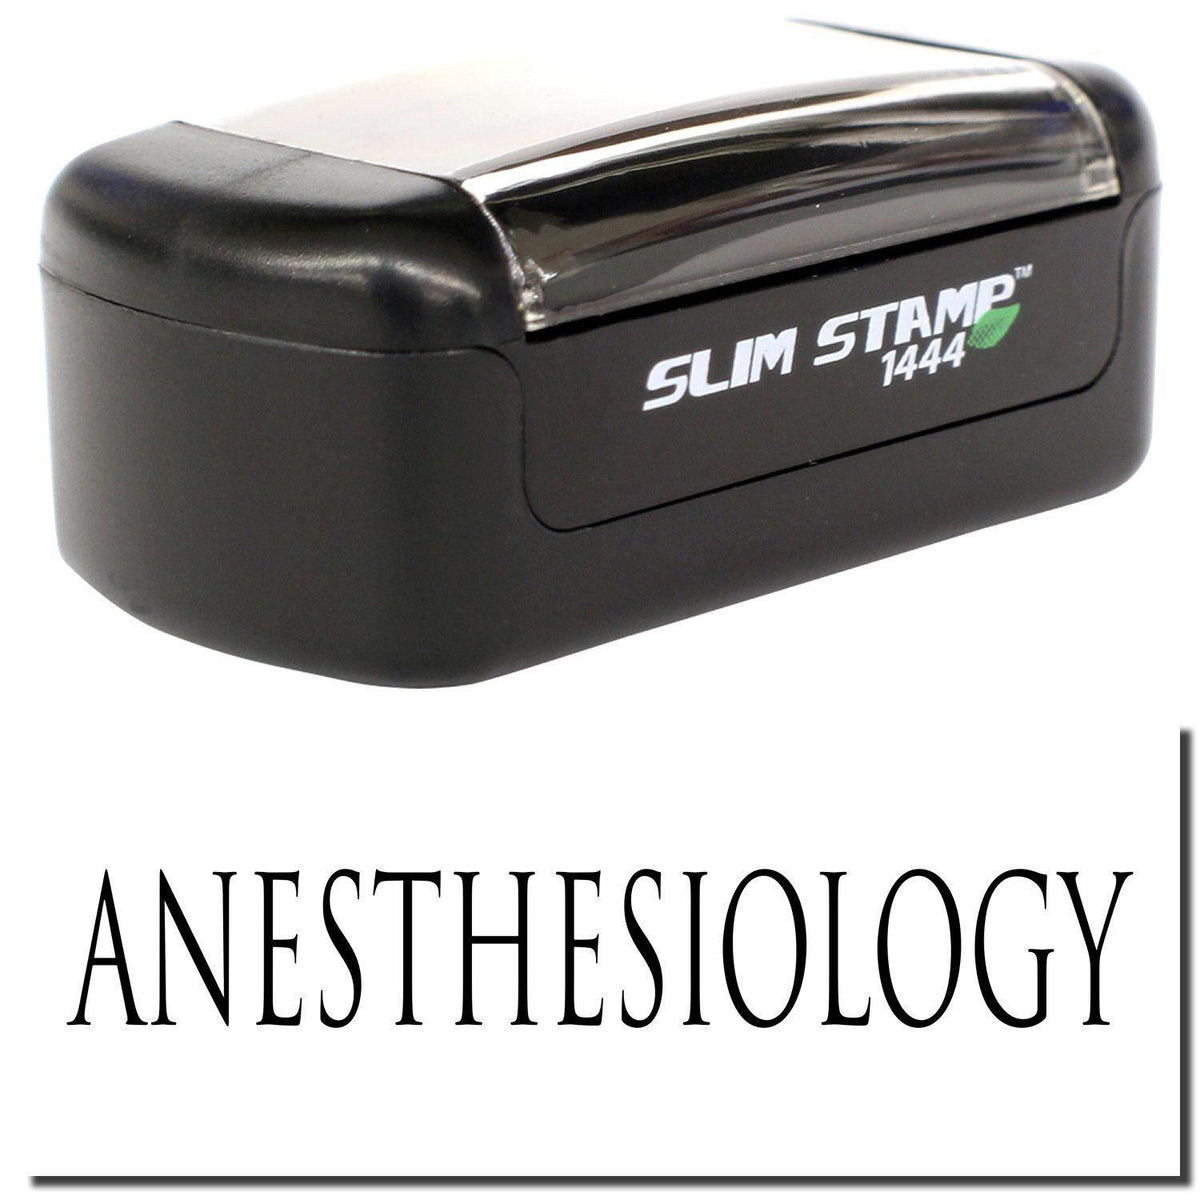 A stock office pre-inked stamp with a stamped image showing how the text &quot;ANESTHESIOLOGY&quot; is displayed after stamping.